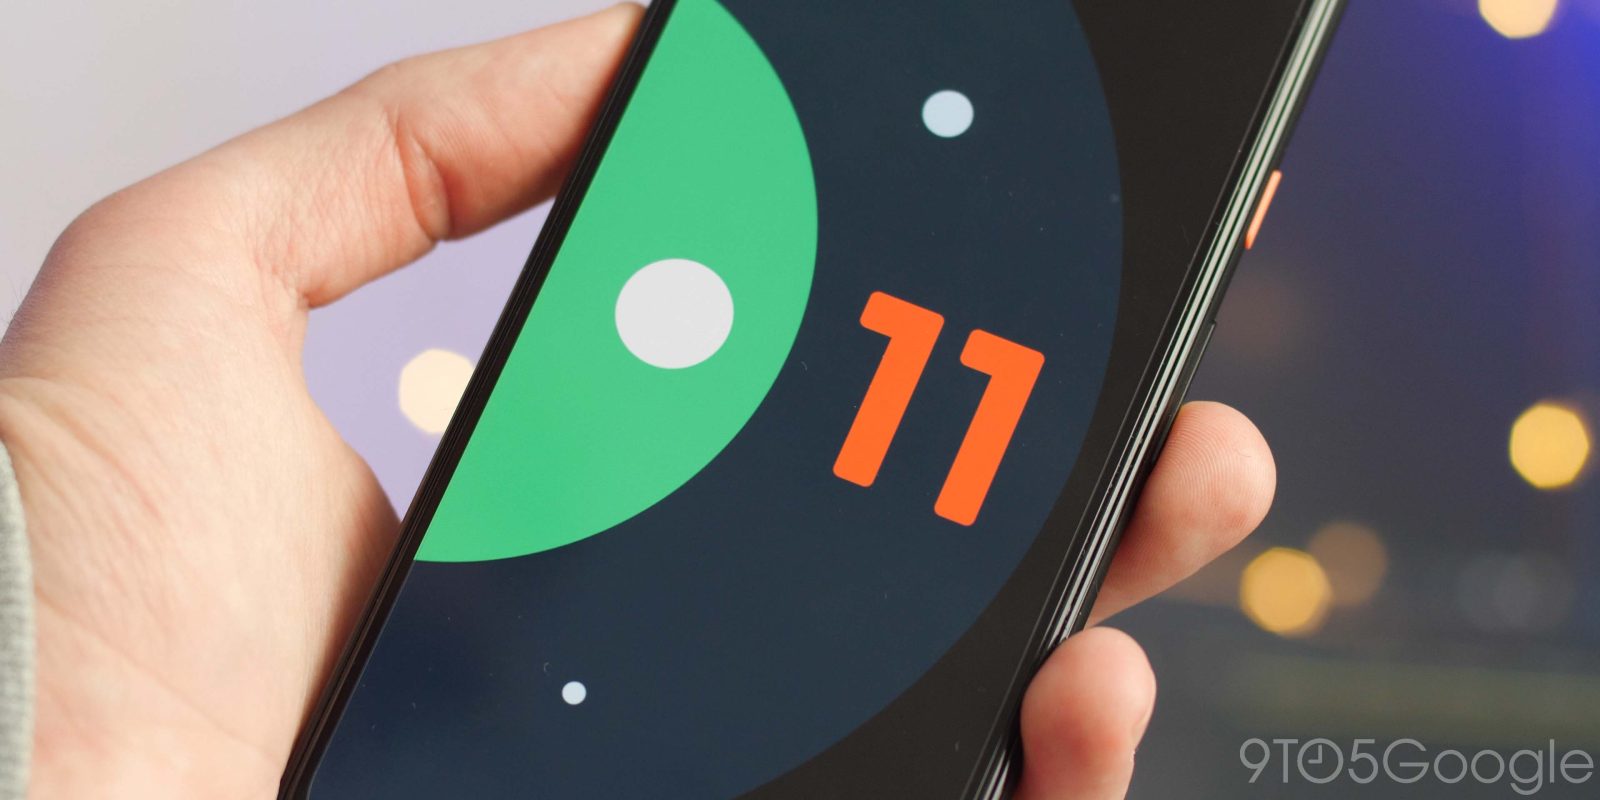 Android 11 Beta 1 features